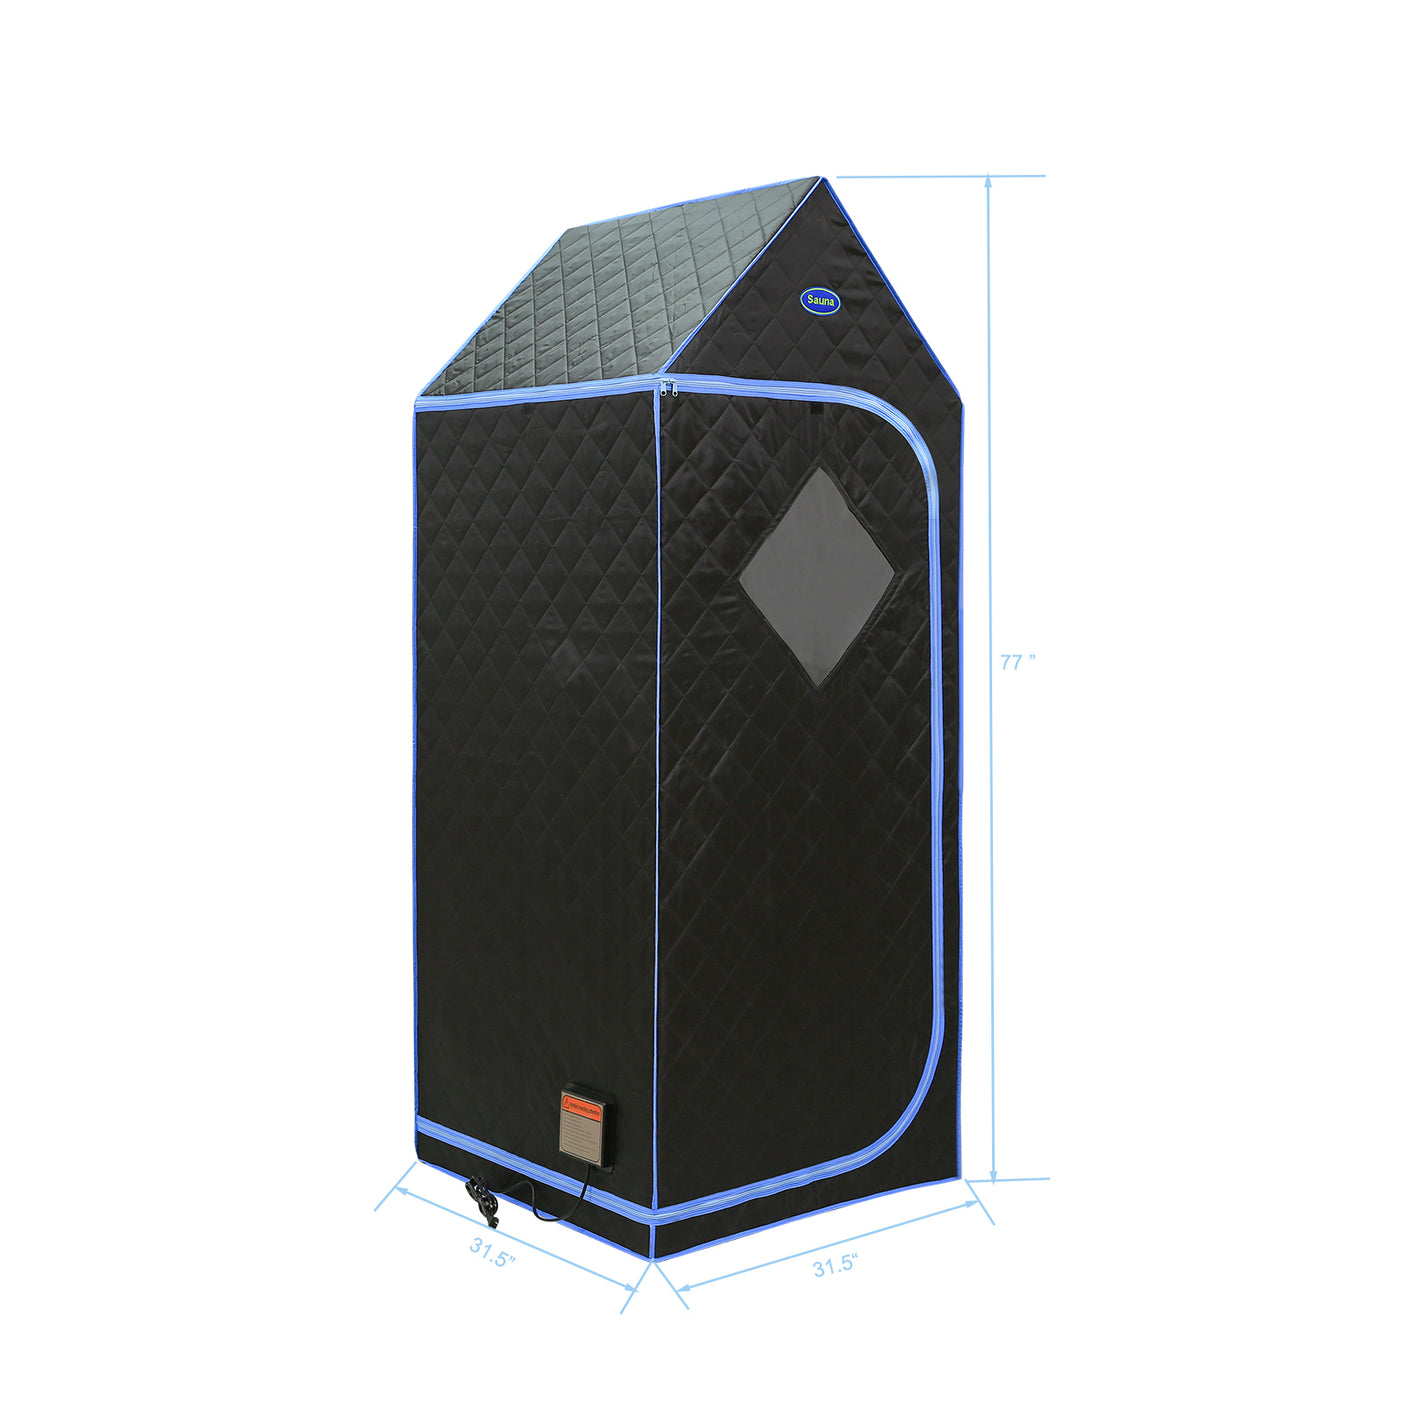 Portable Gothic Roof Plus Type Full Size Far Infrared Sauna tent. Spa, Detox ,Therapy and Relaxation at home.Larger Space,Stainless Steel Pipes Connector Easy to Install. FCC Certification--Black